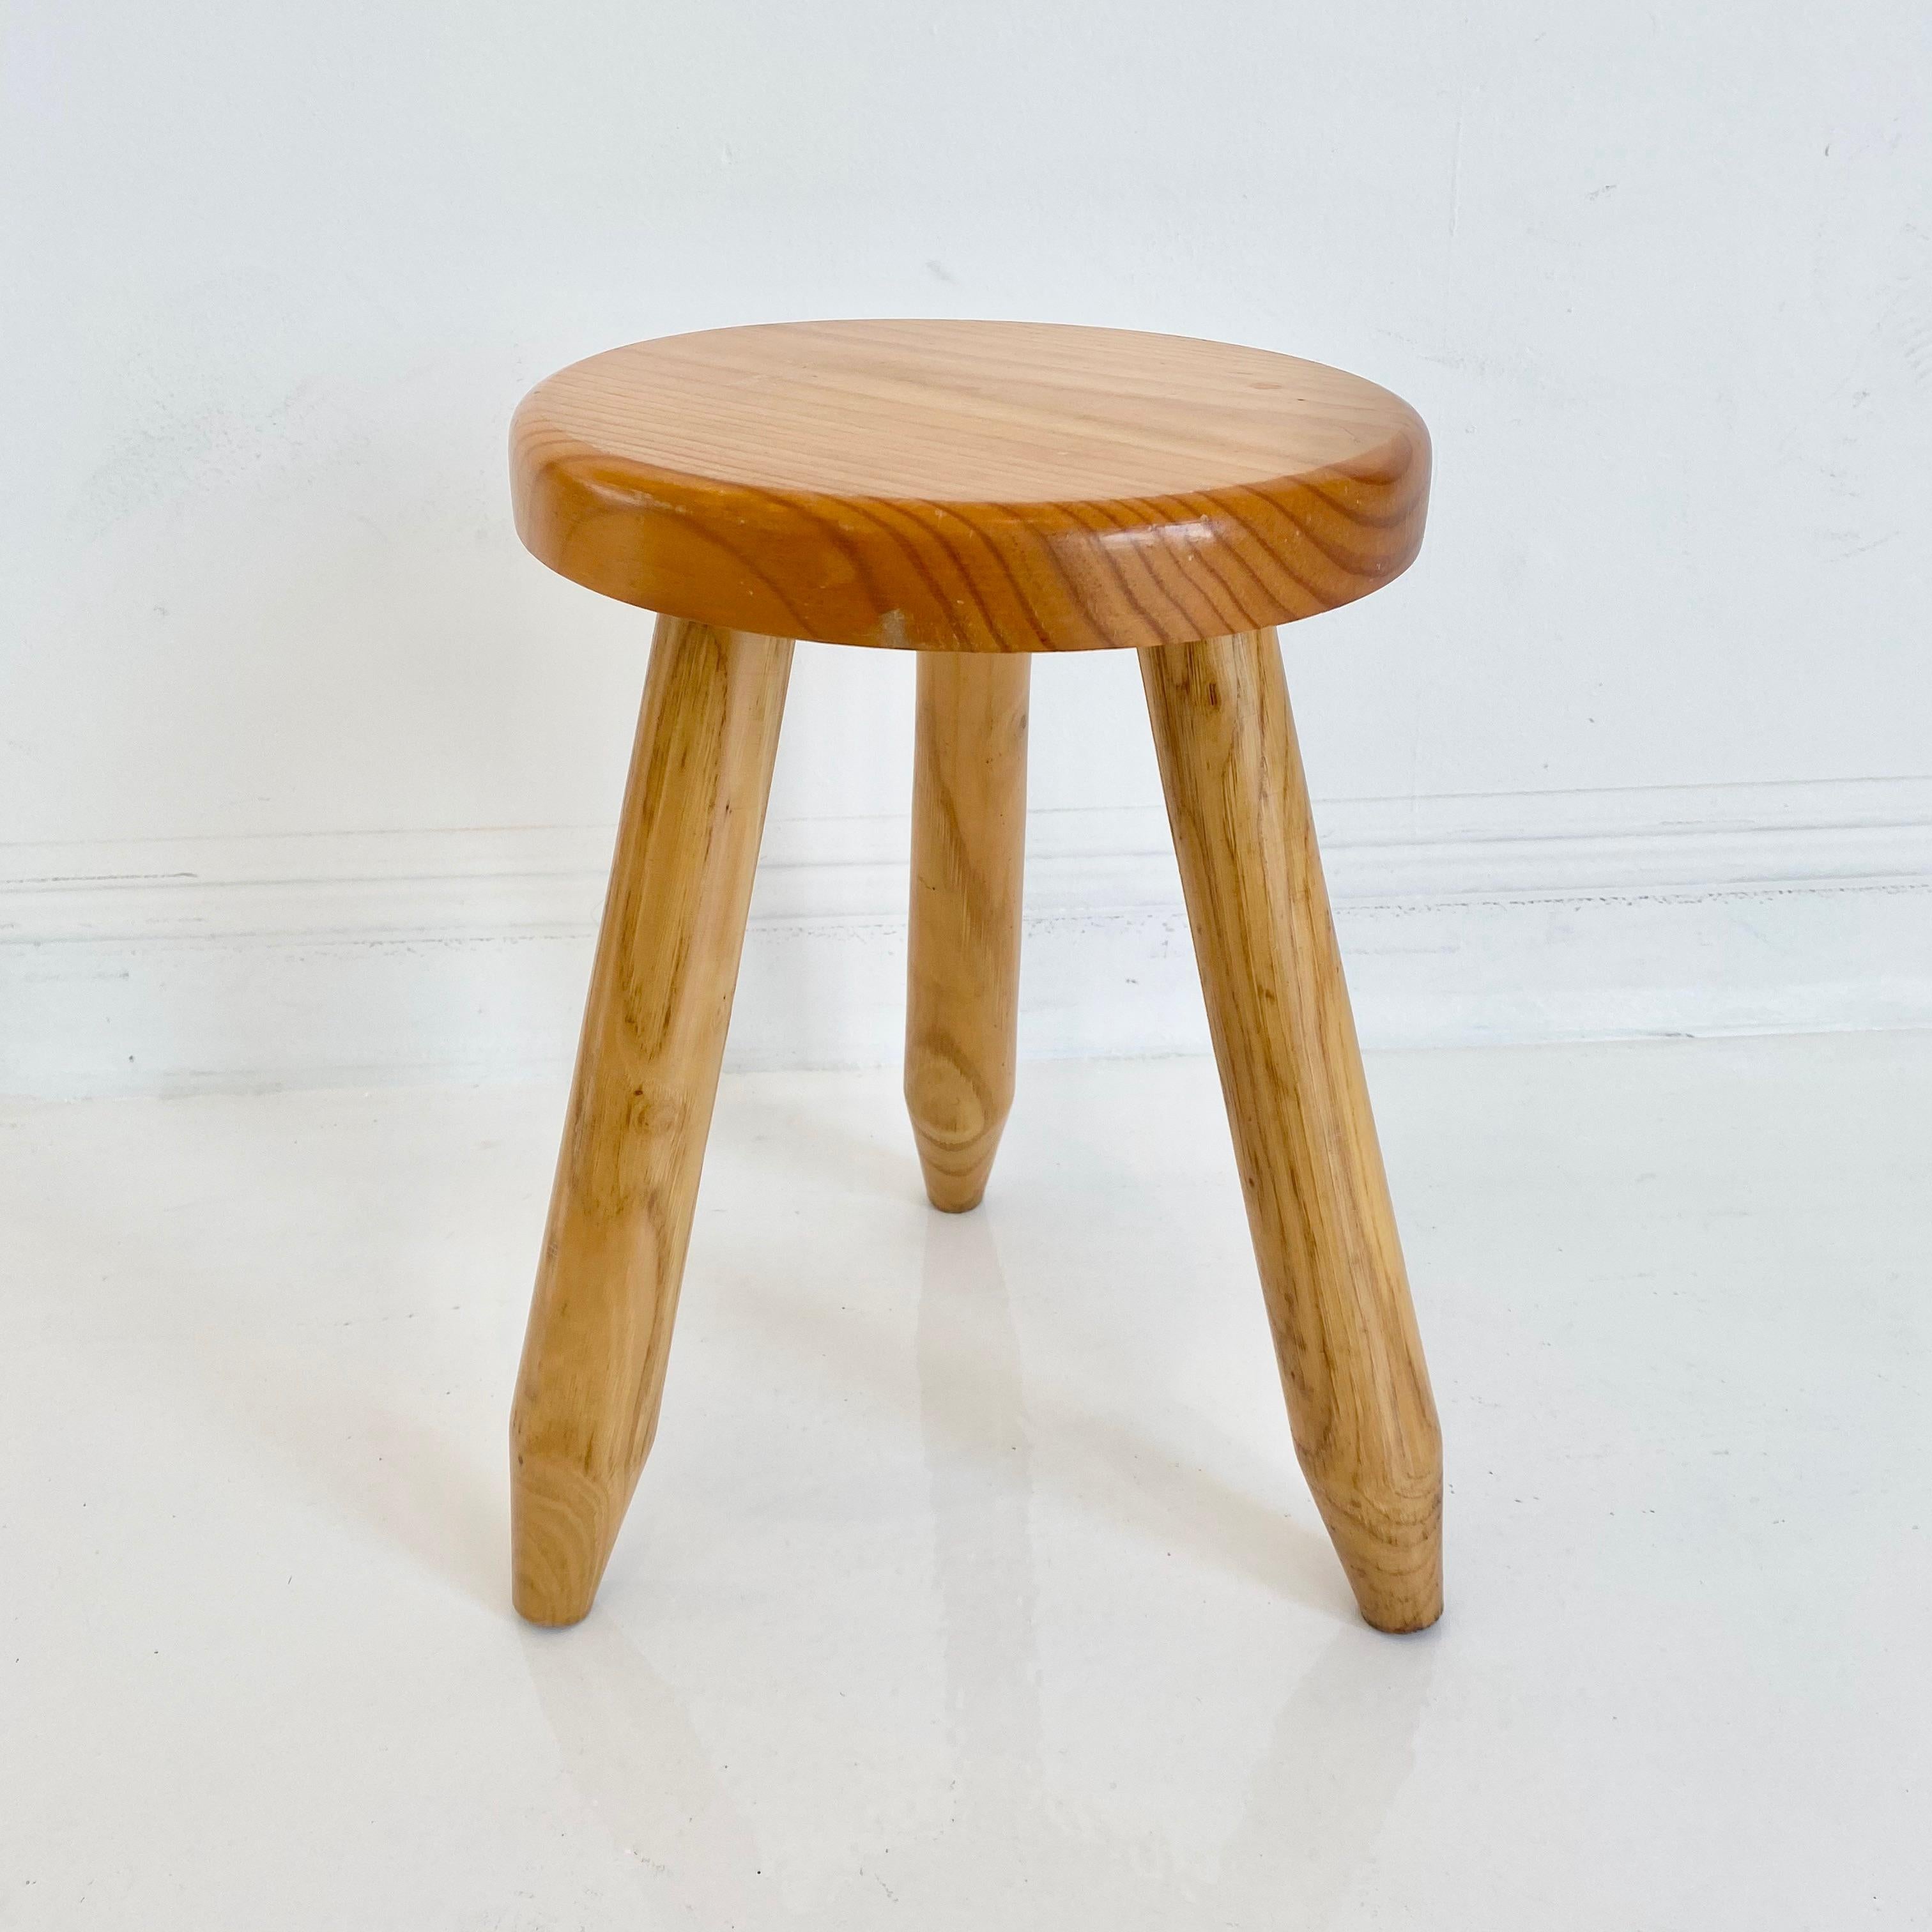 Handsome wood stool from France in the style of Charlotte Perriand. Made of Pine in the 1960s. Standing on three tapered legs. Good vintage condition.
  